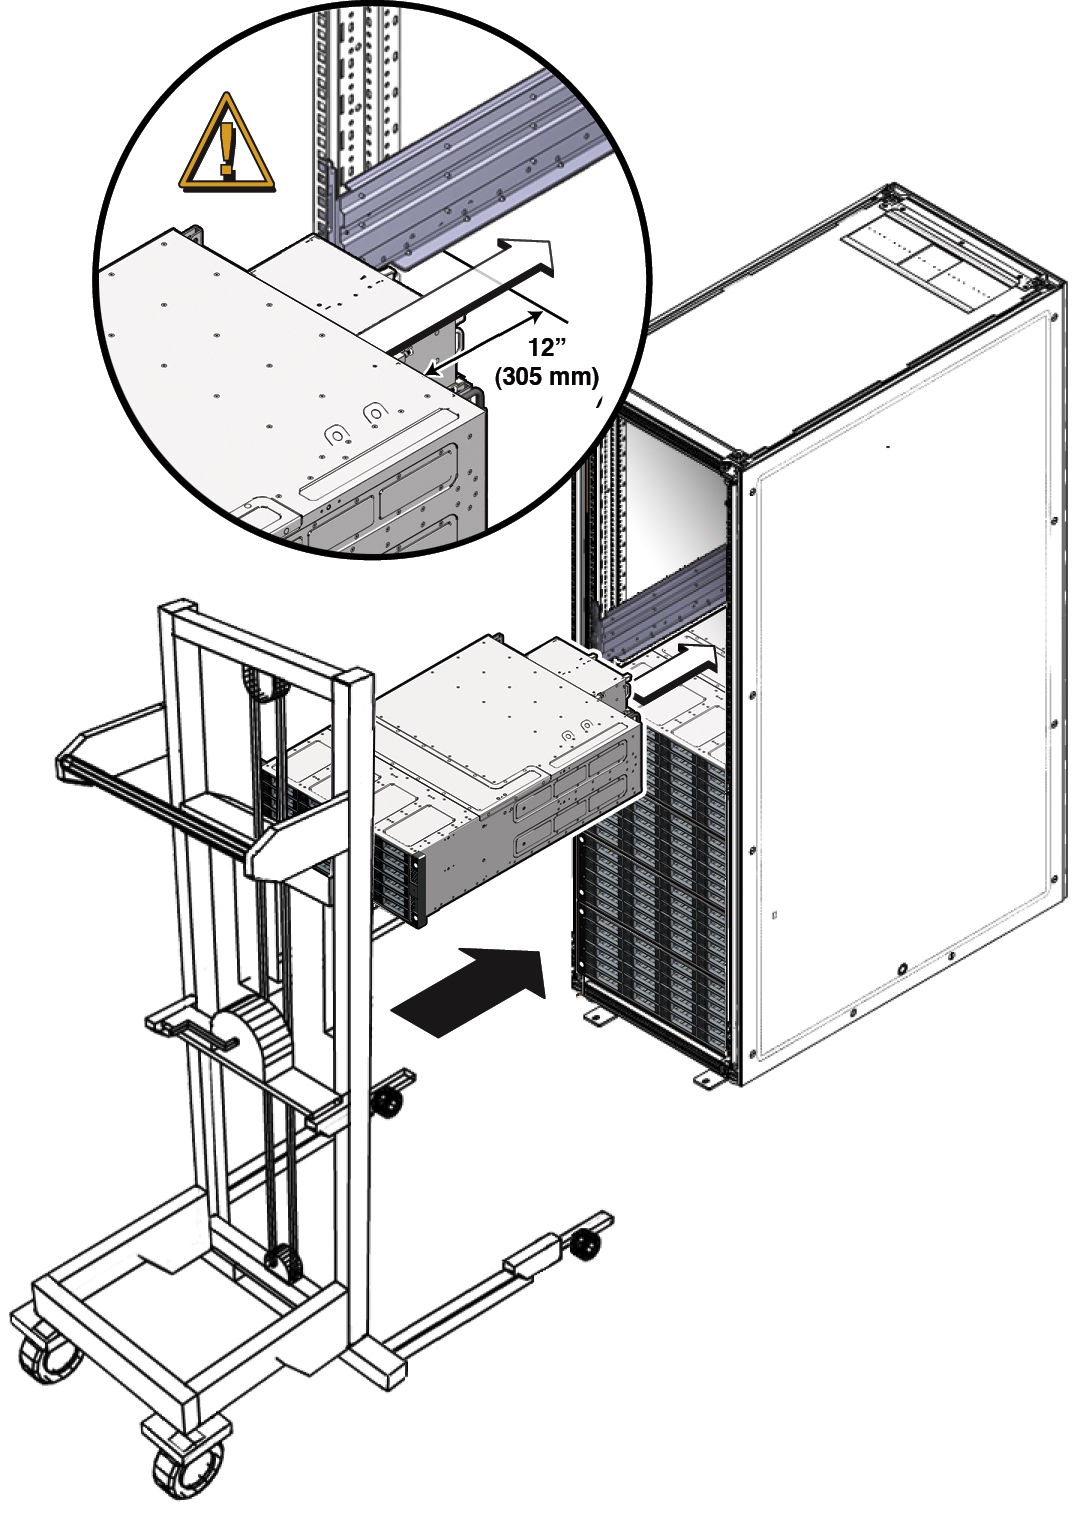 image:Graphic showing the system being inserted into the rack.